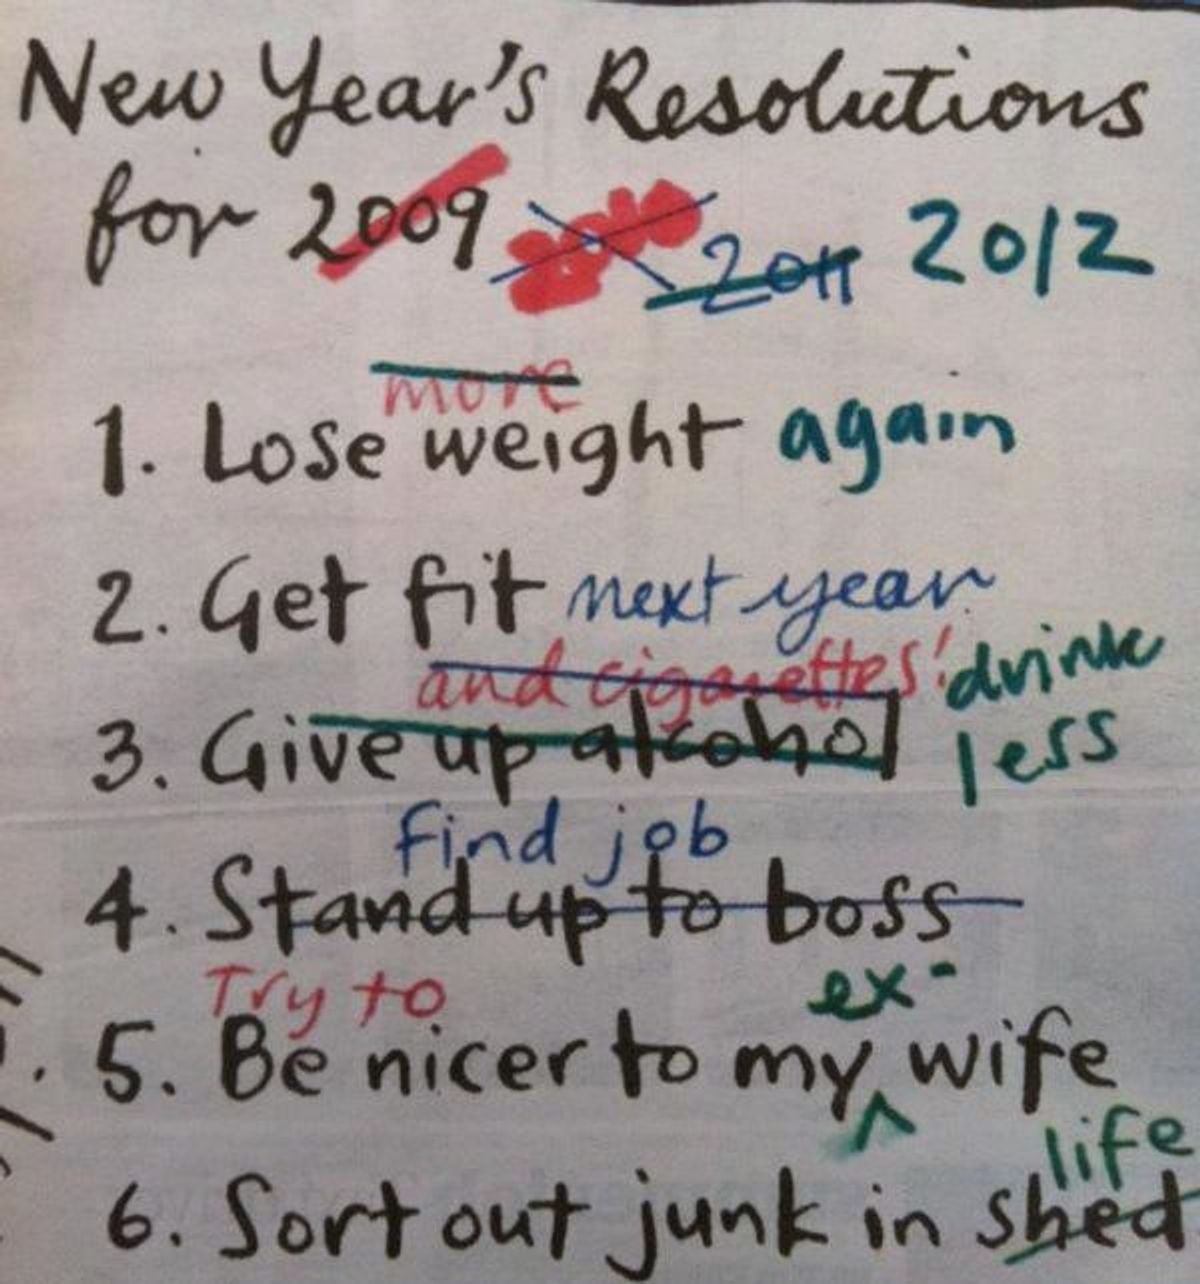 Why I Won't  Make Any New Years Resolutions